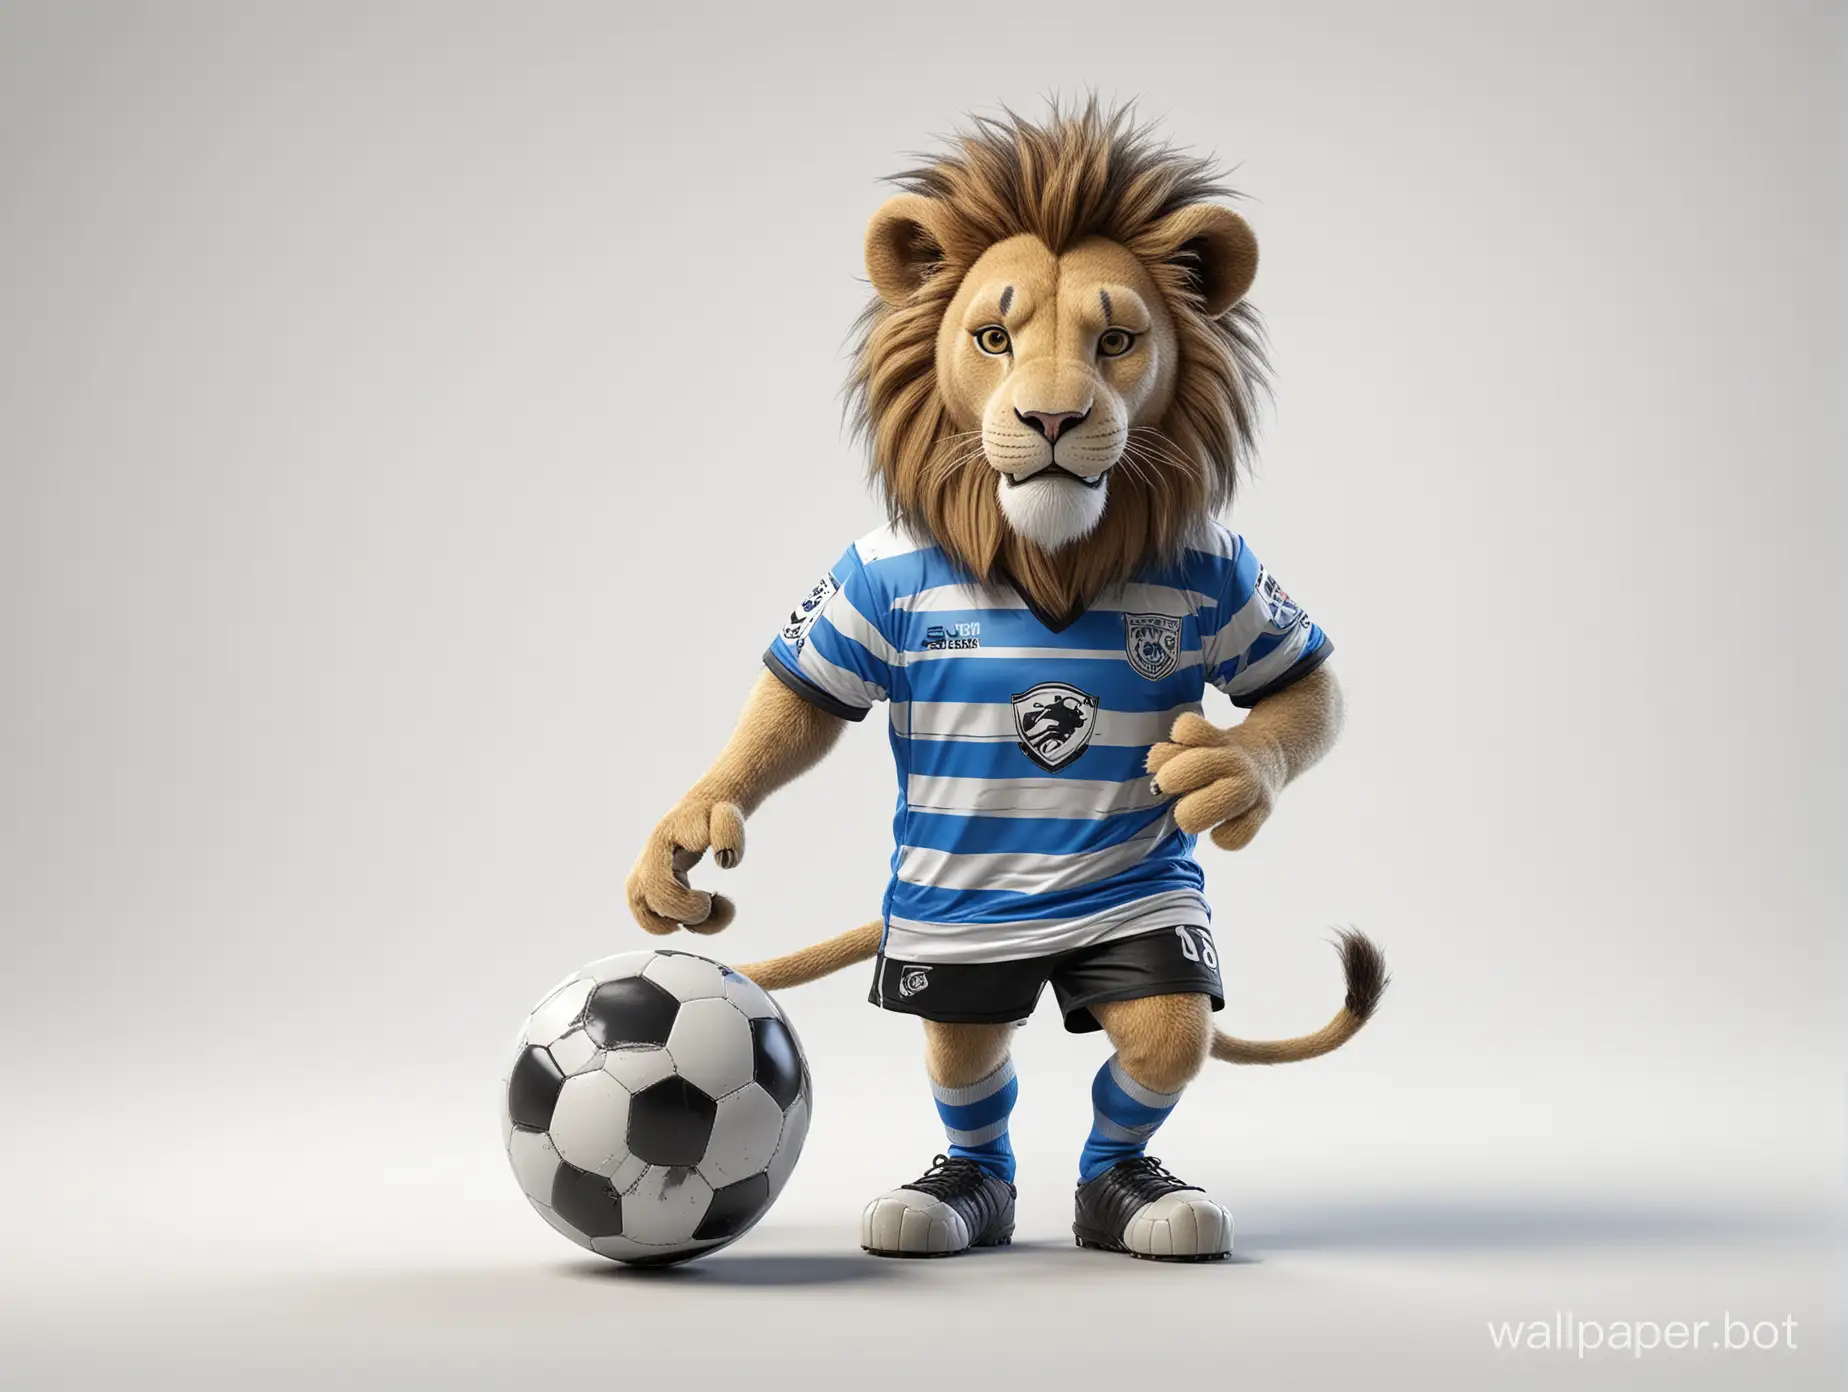 soccer lion team mascot in blue and white with black stripes with a ball high implementation white background